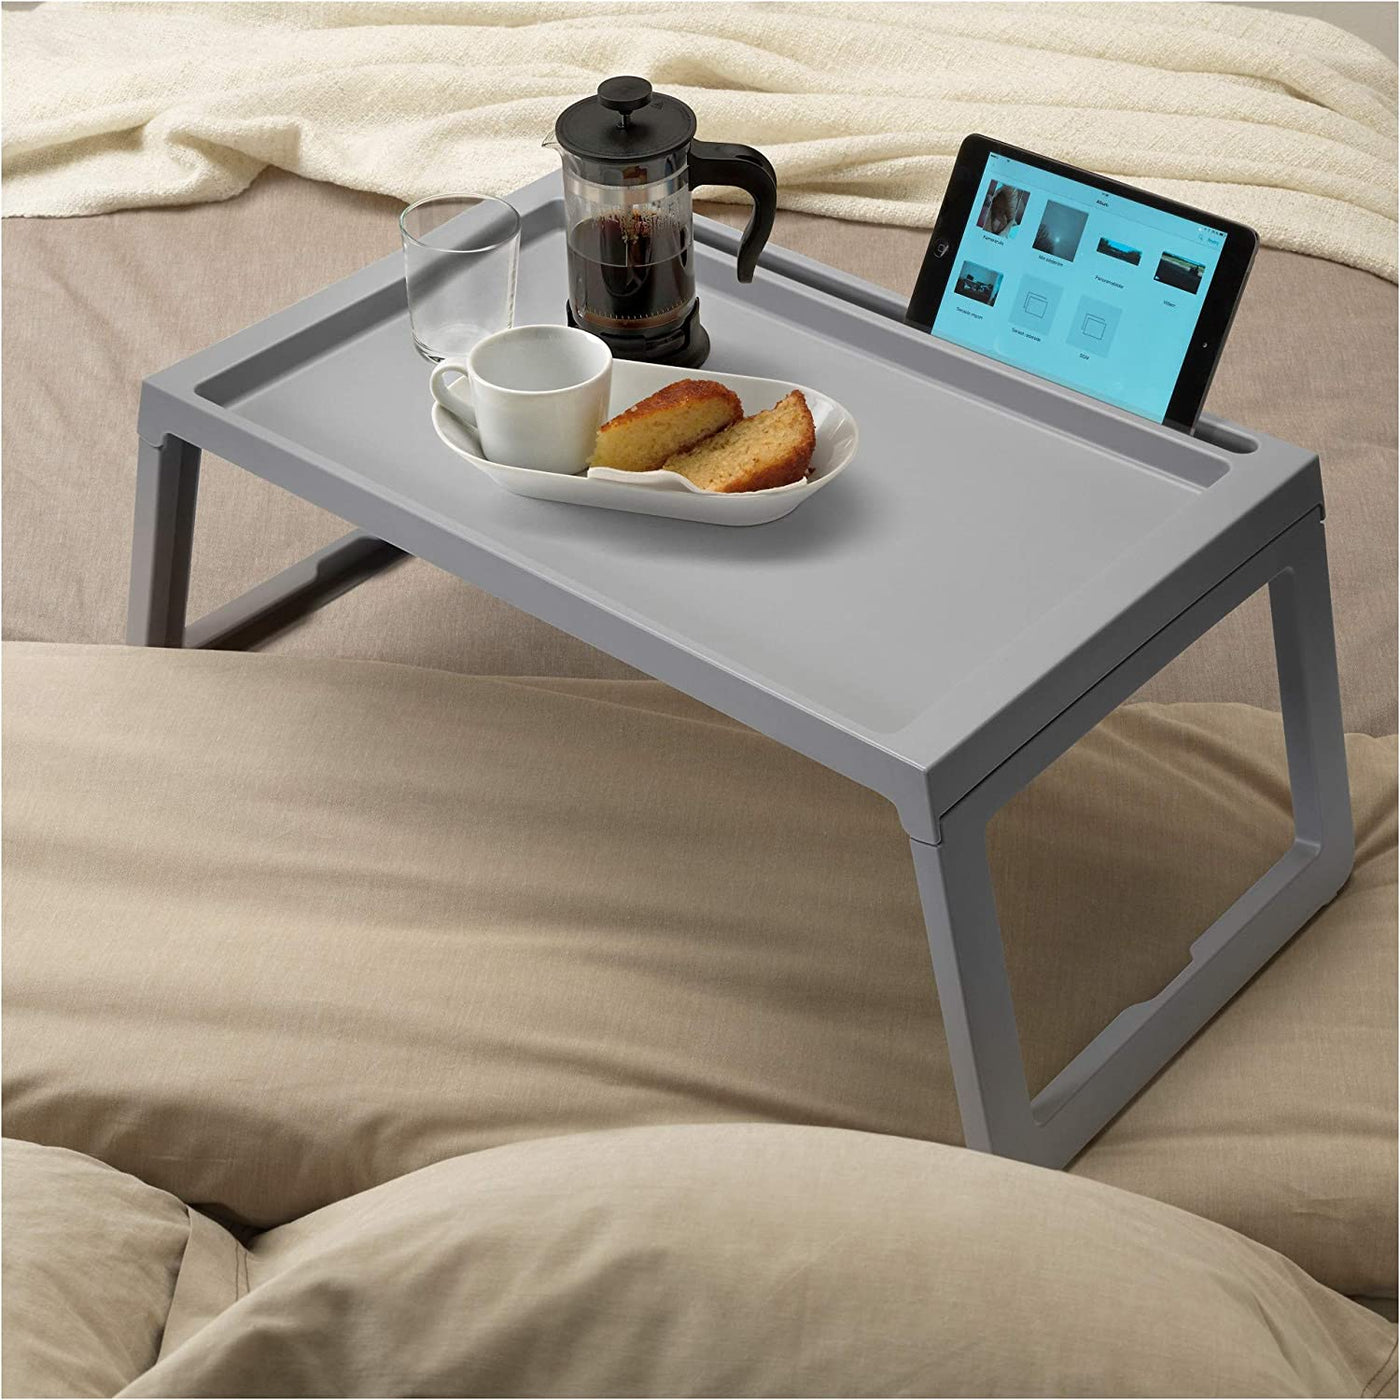 Dubkart Foldable Bed Table Tray Caddy for Food Laptop (Grey)